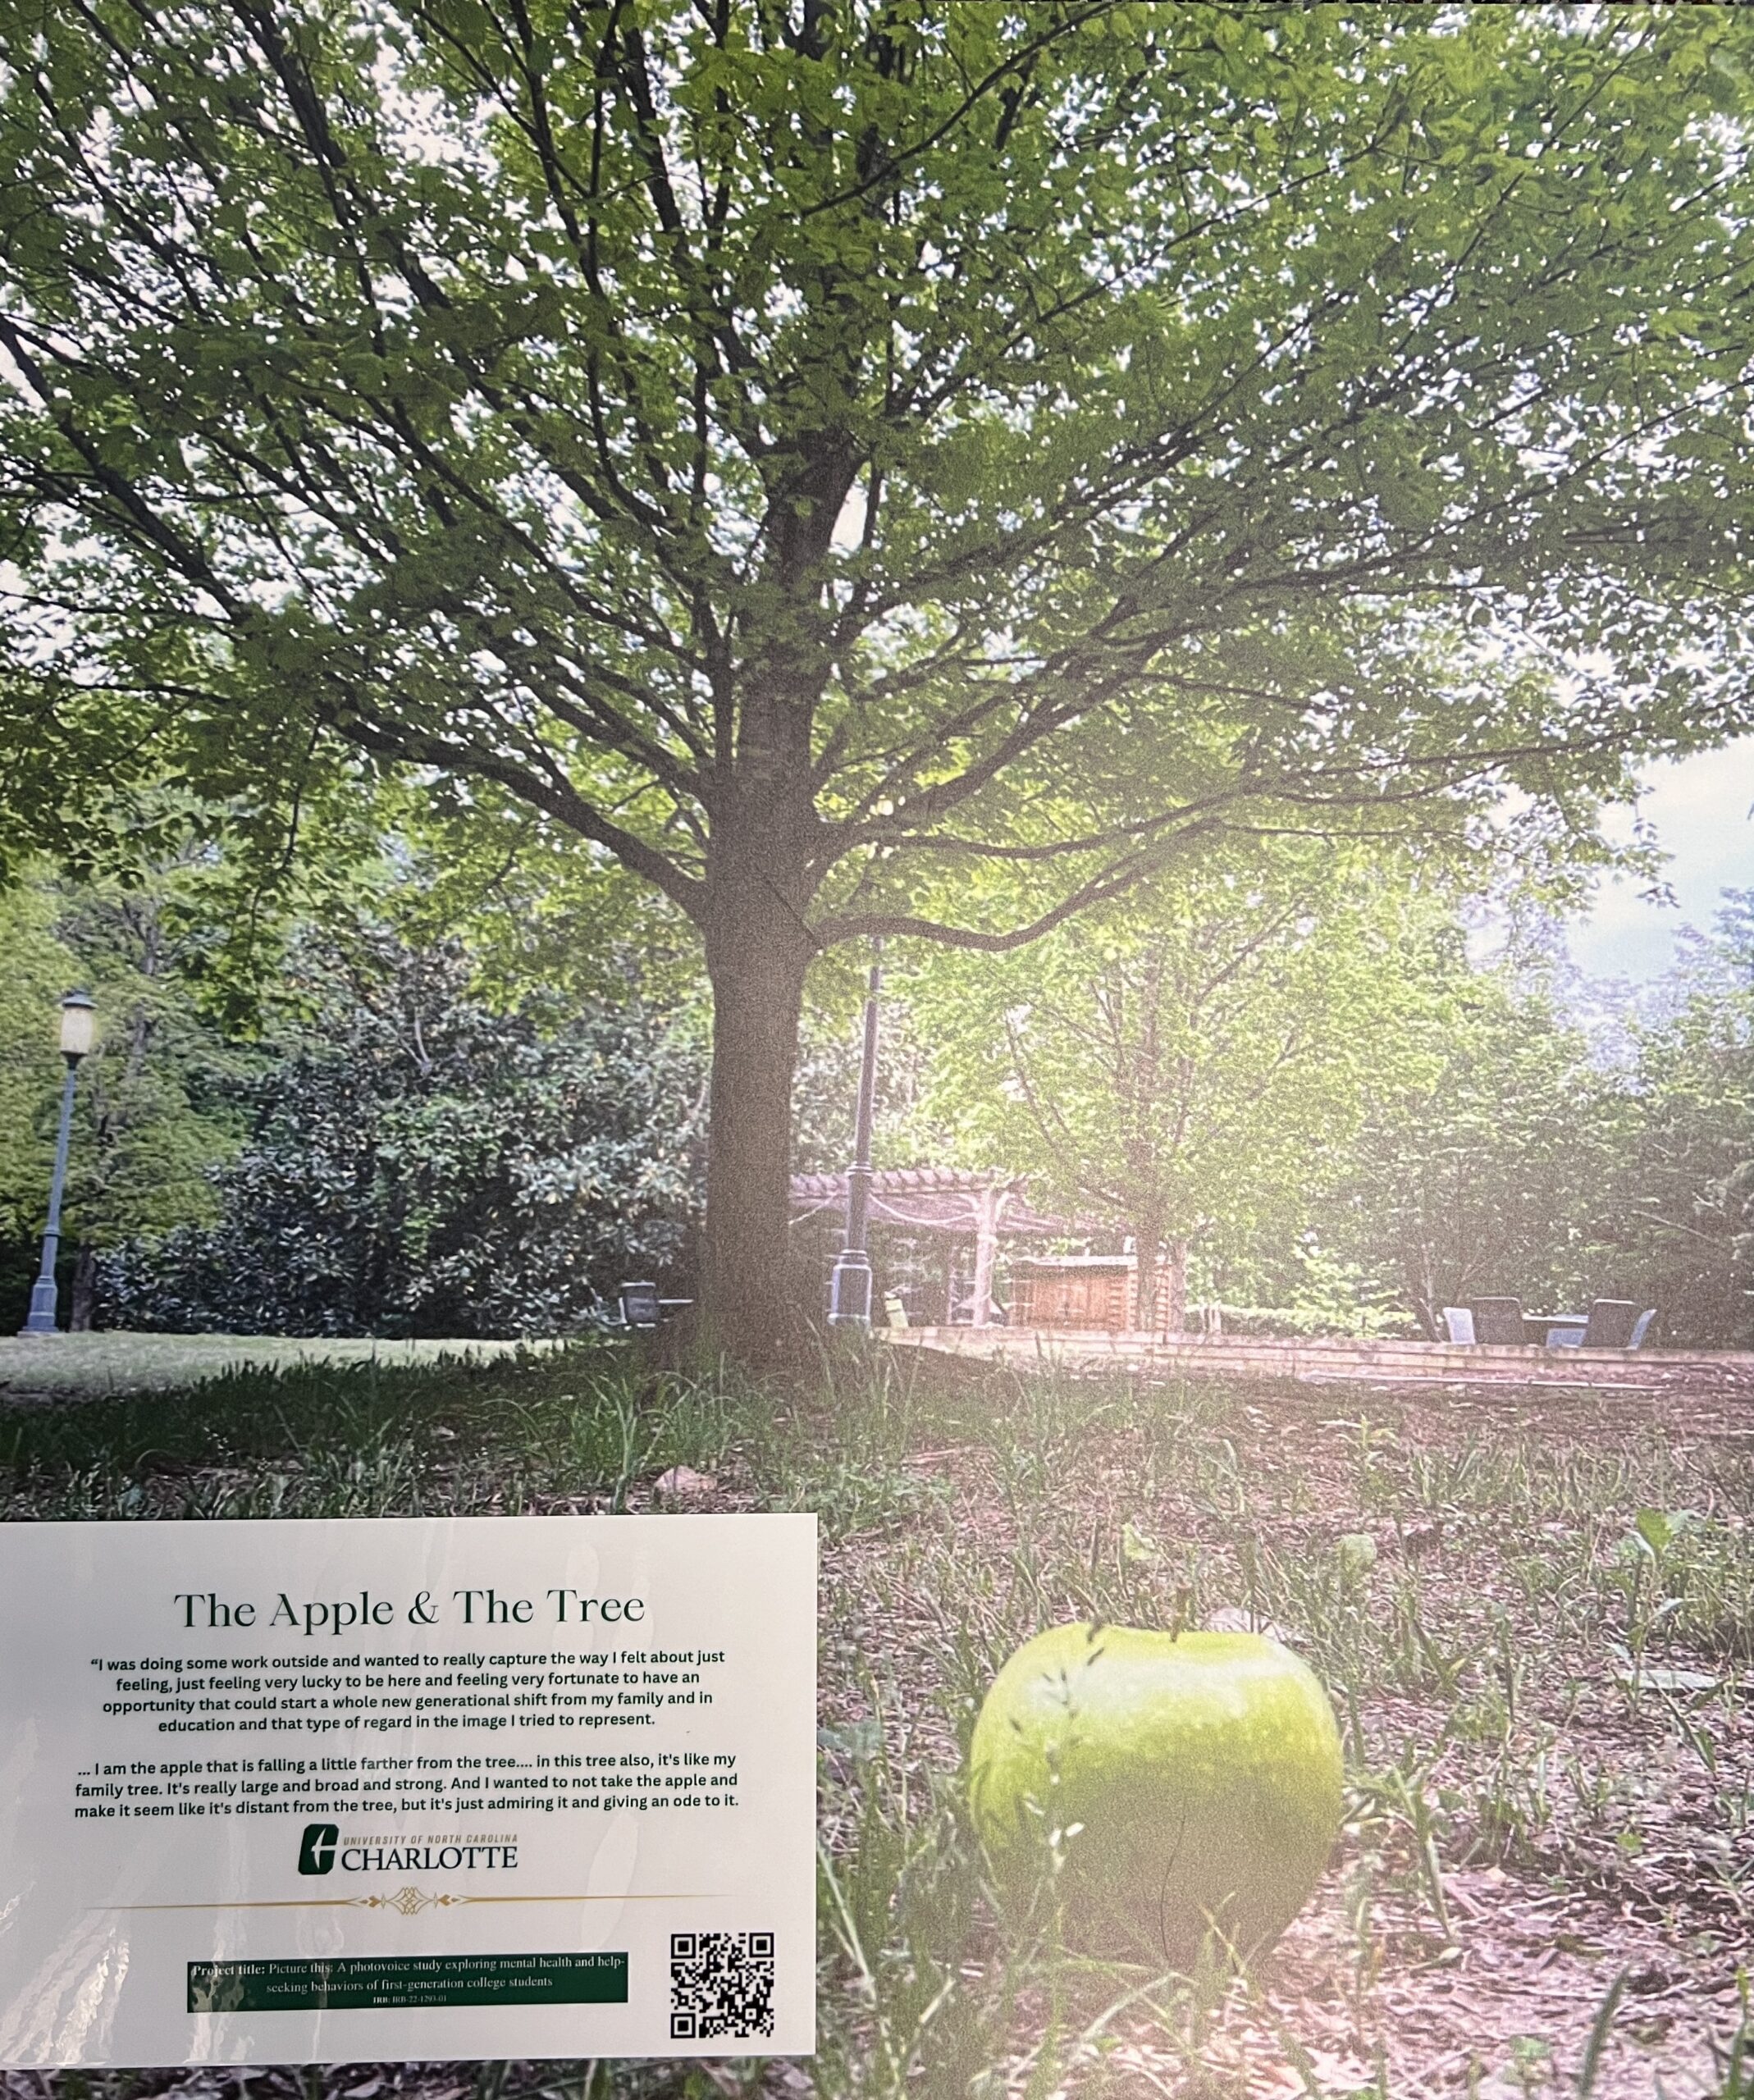 Sign next to an apple in front of a tree